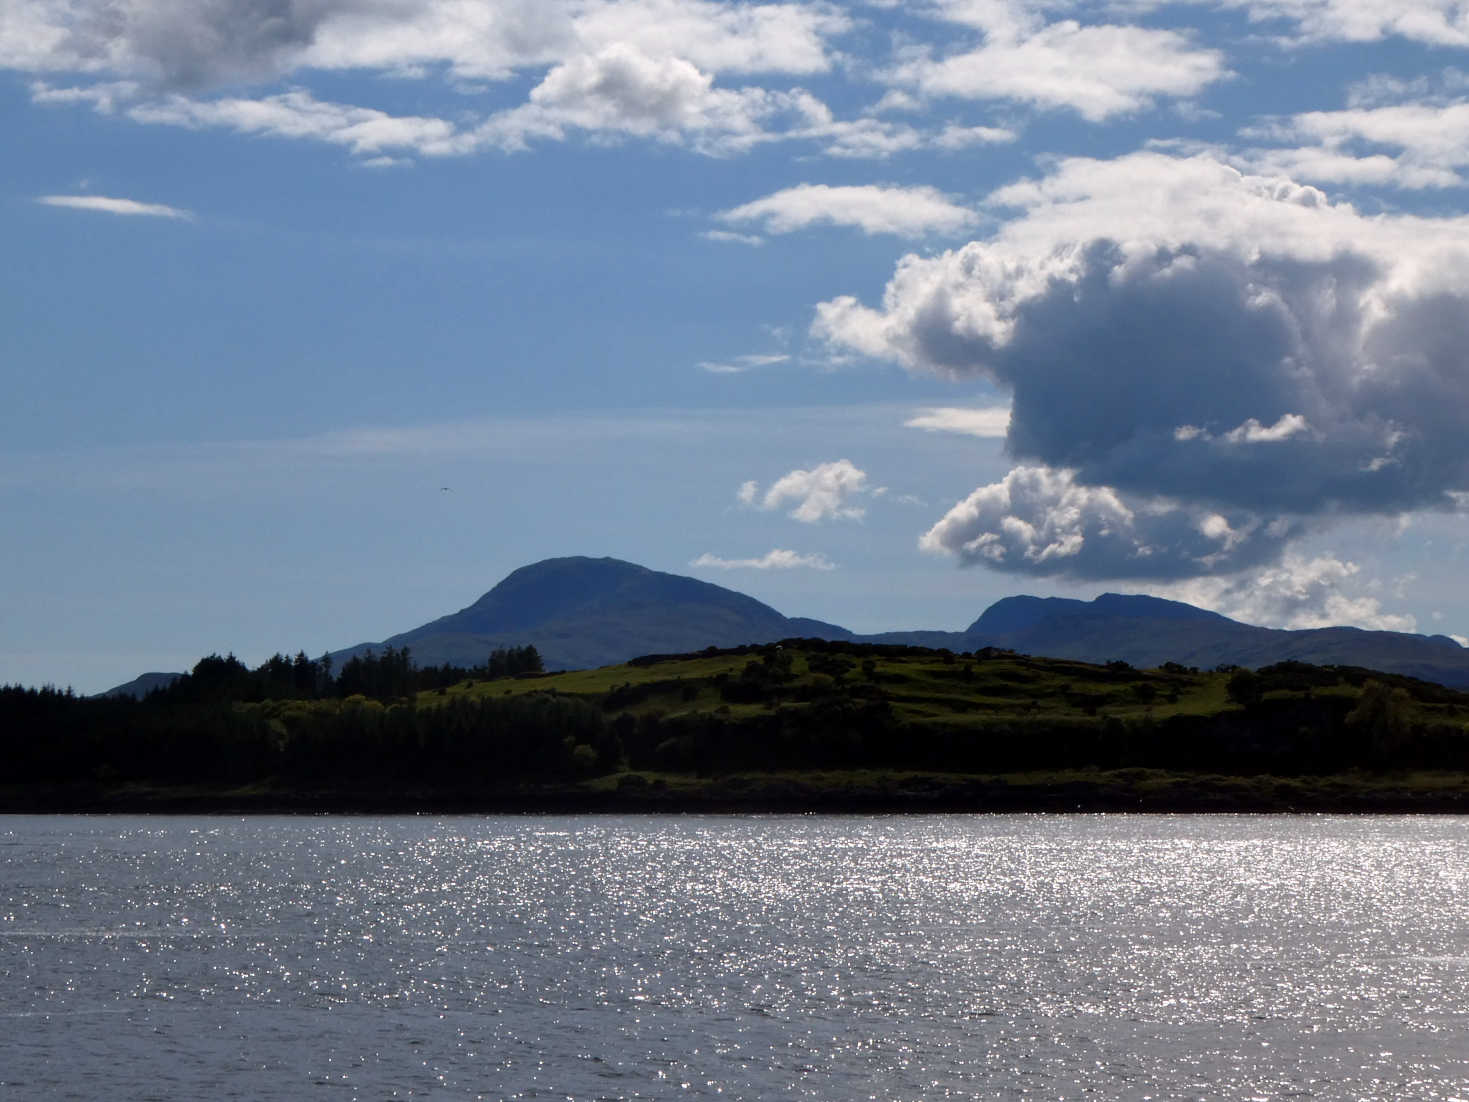 The Ile of mull from ferry 2022